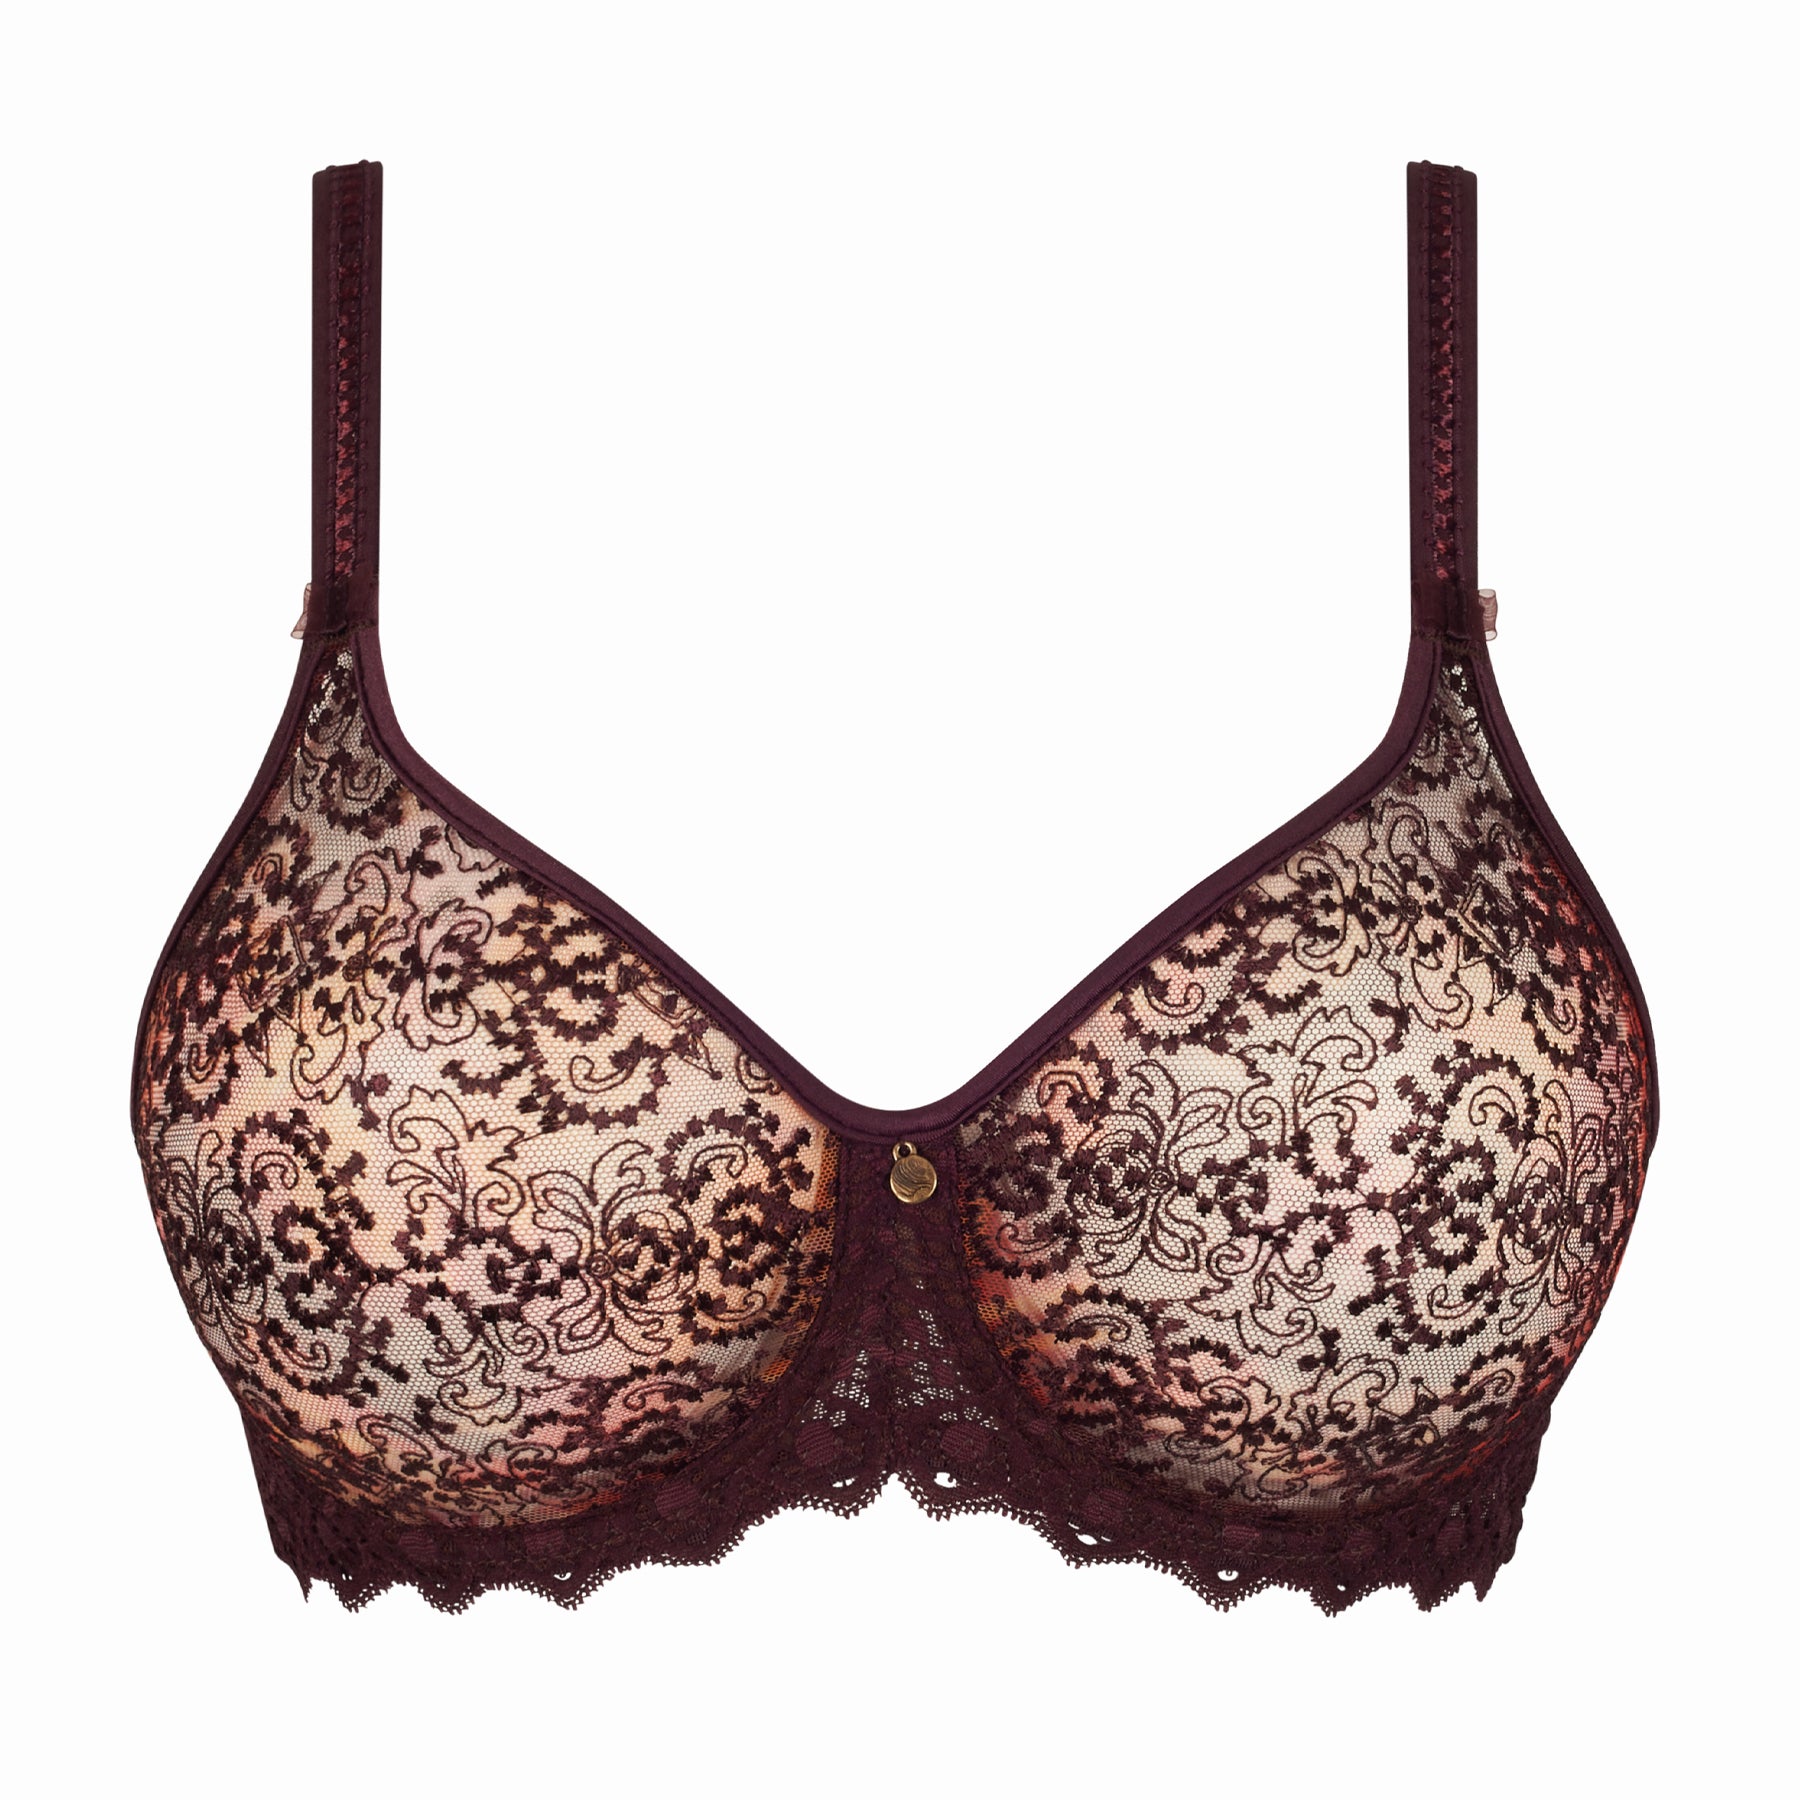 Victoria's Secret Caramel Kiss Brown Smooth Full Cup Push Up Bra